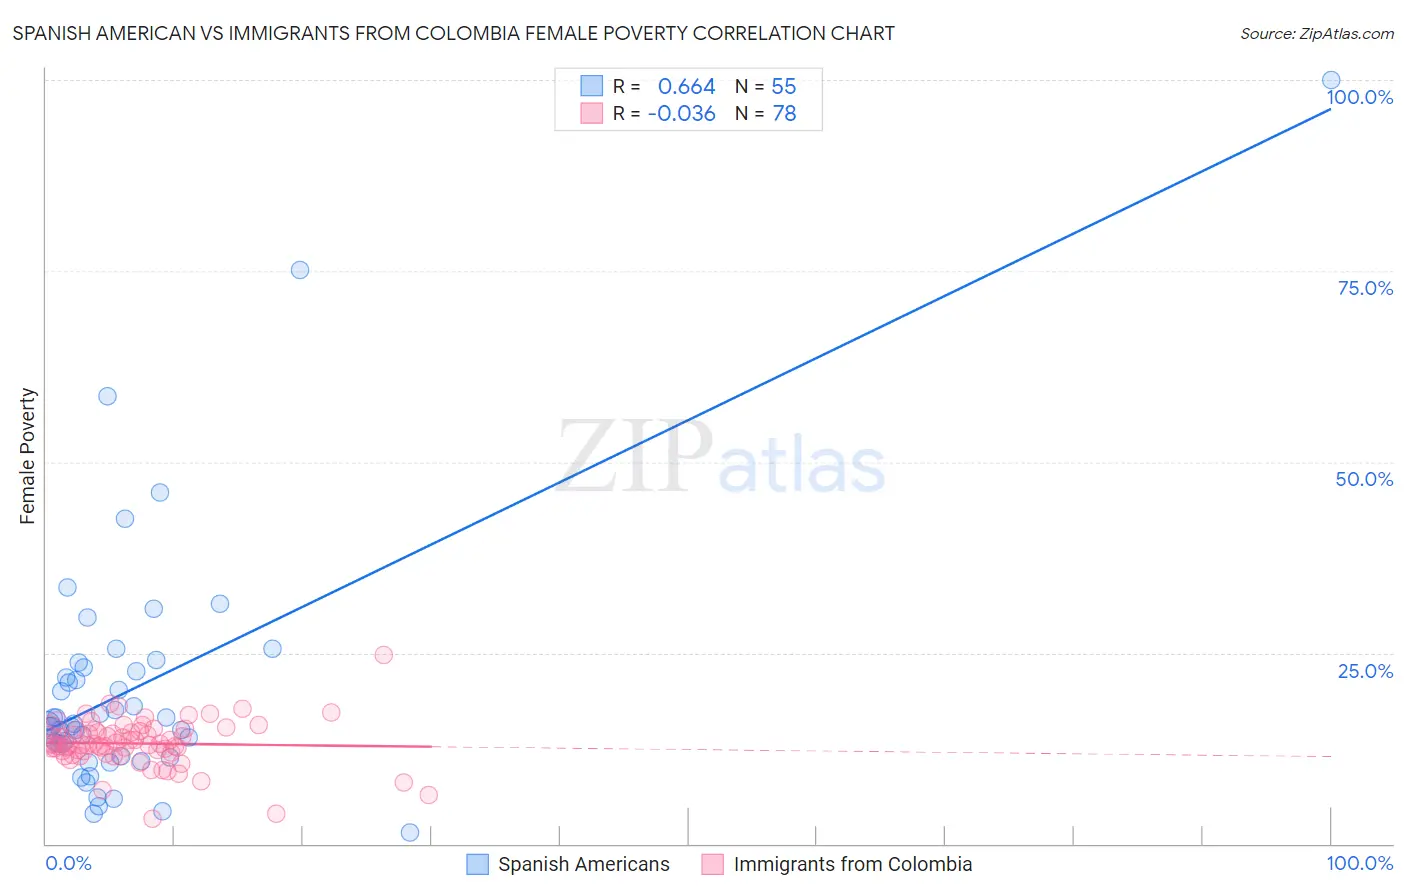 Spanish American vs Immigrants from Colombia Female Poverty